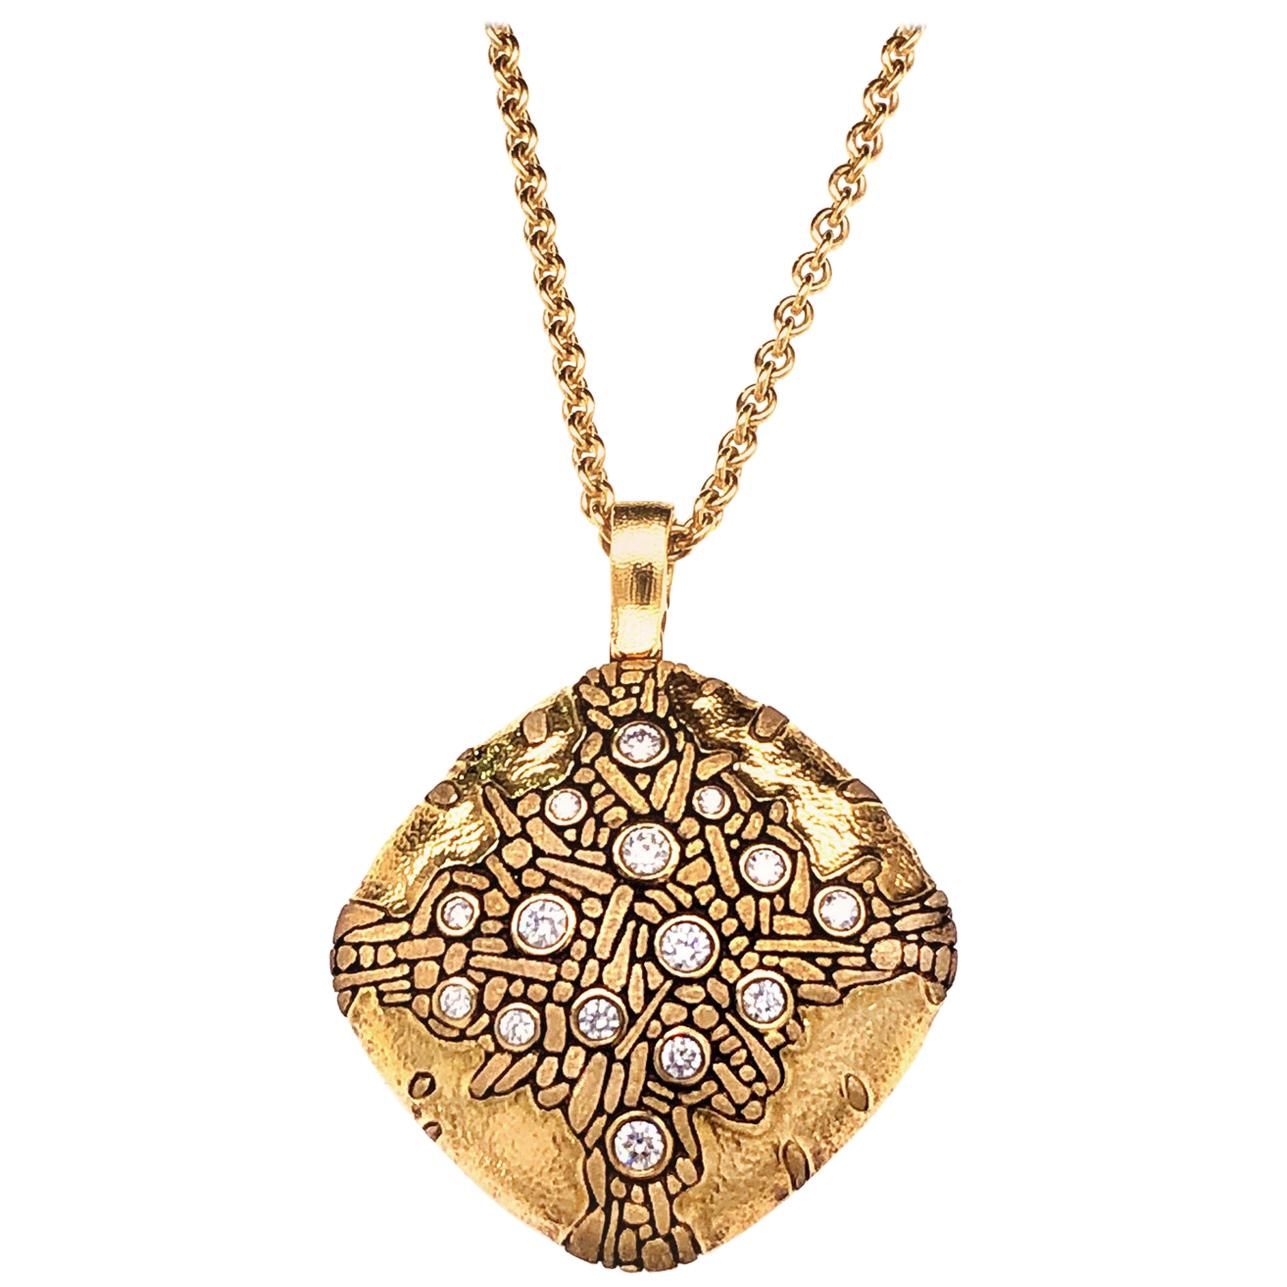 Alex Sepkus "Cushion" Pendant Necklace with White Diamonds in Gold For Sale